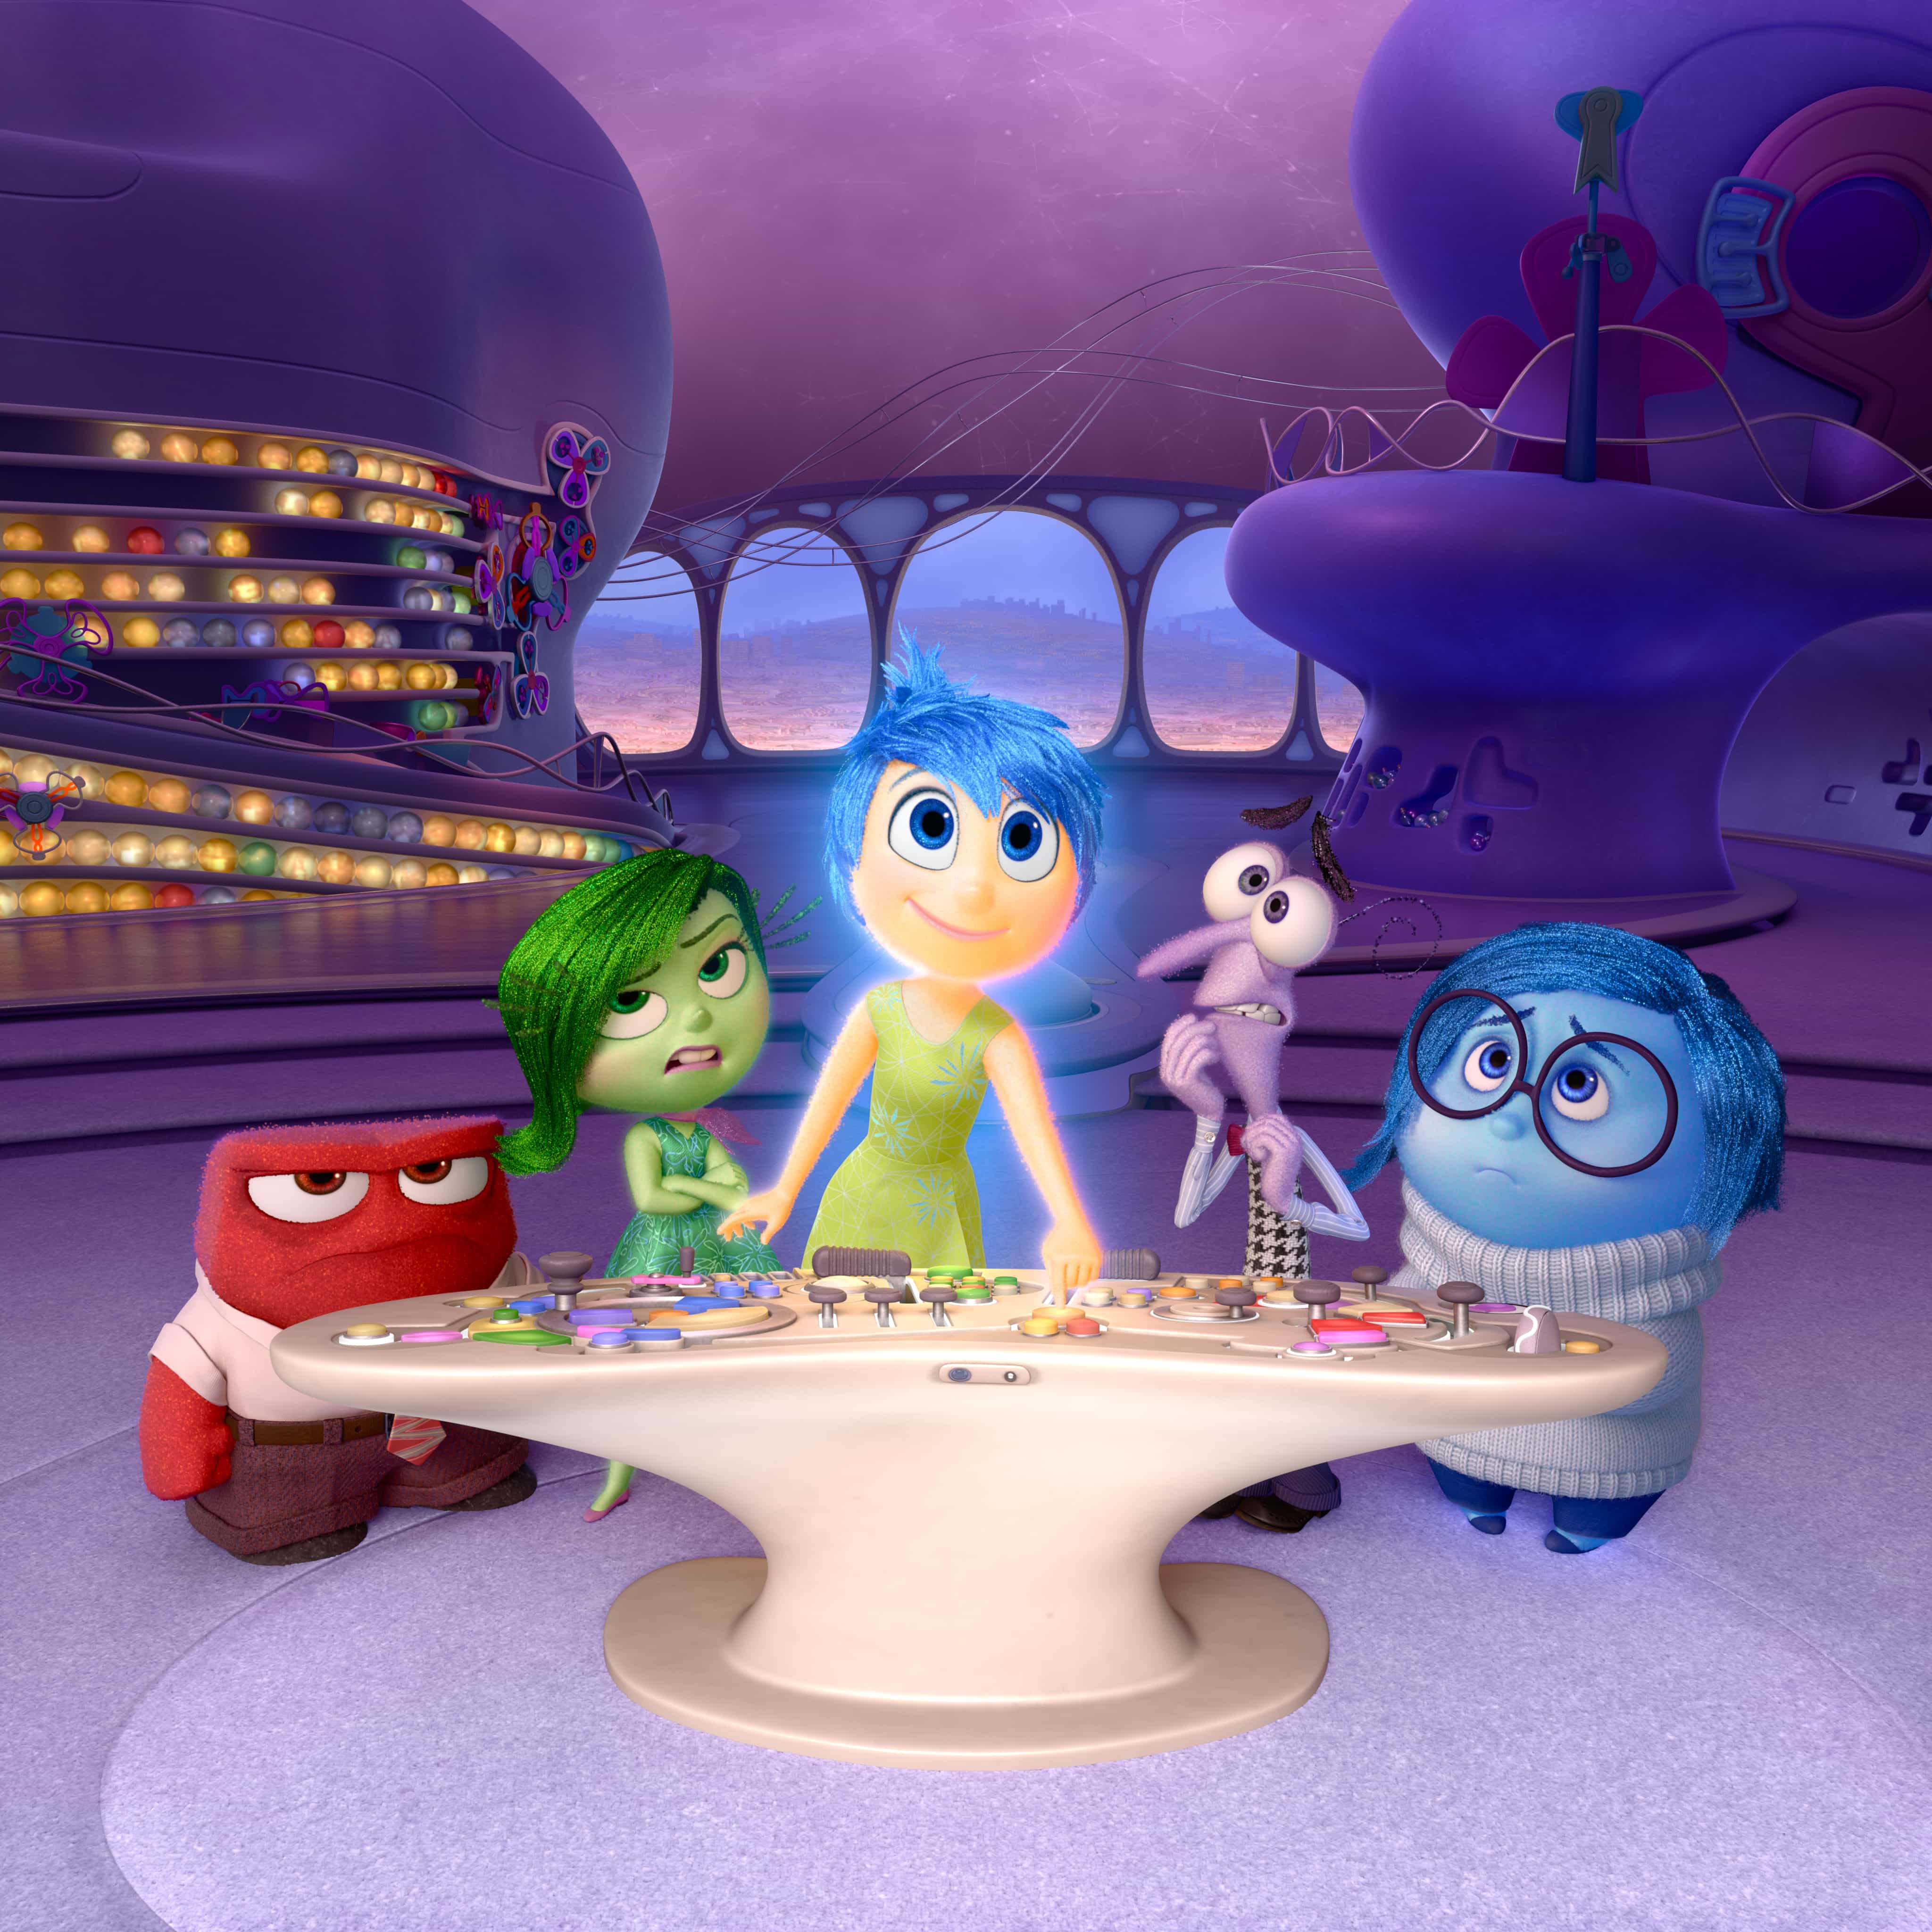 A Look Inside The Challenges Of Making Inside Out